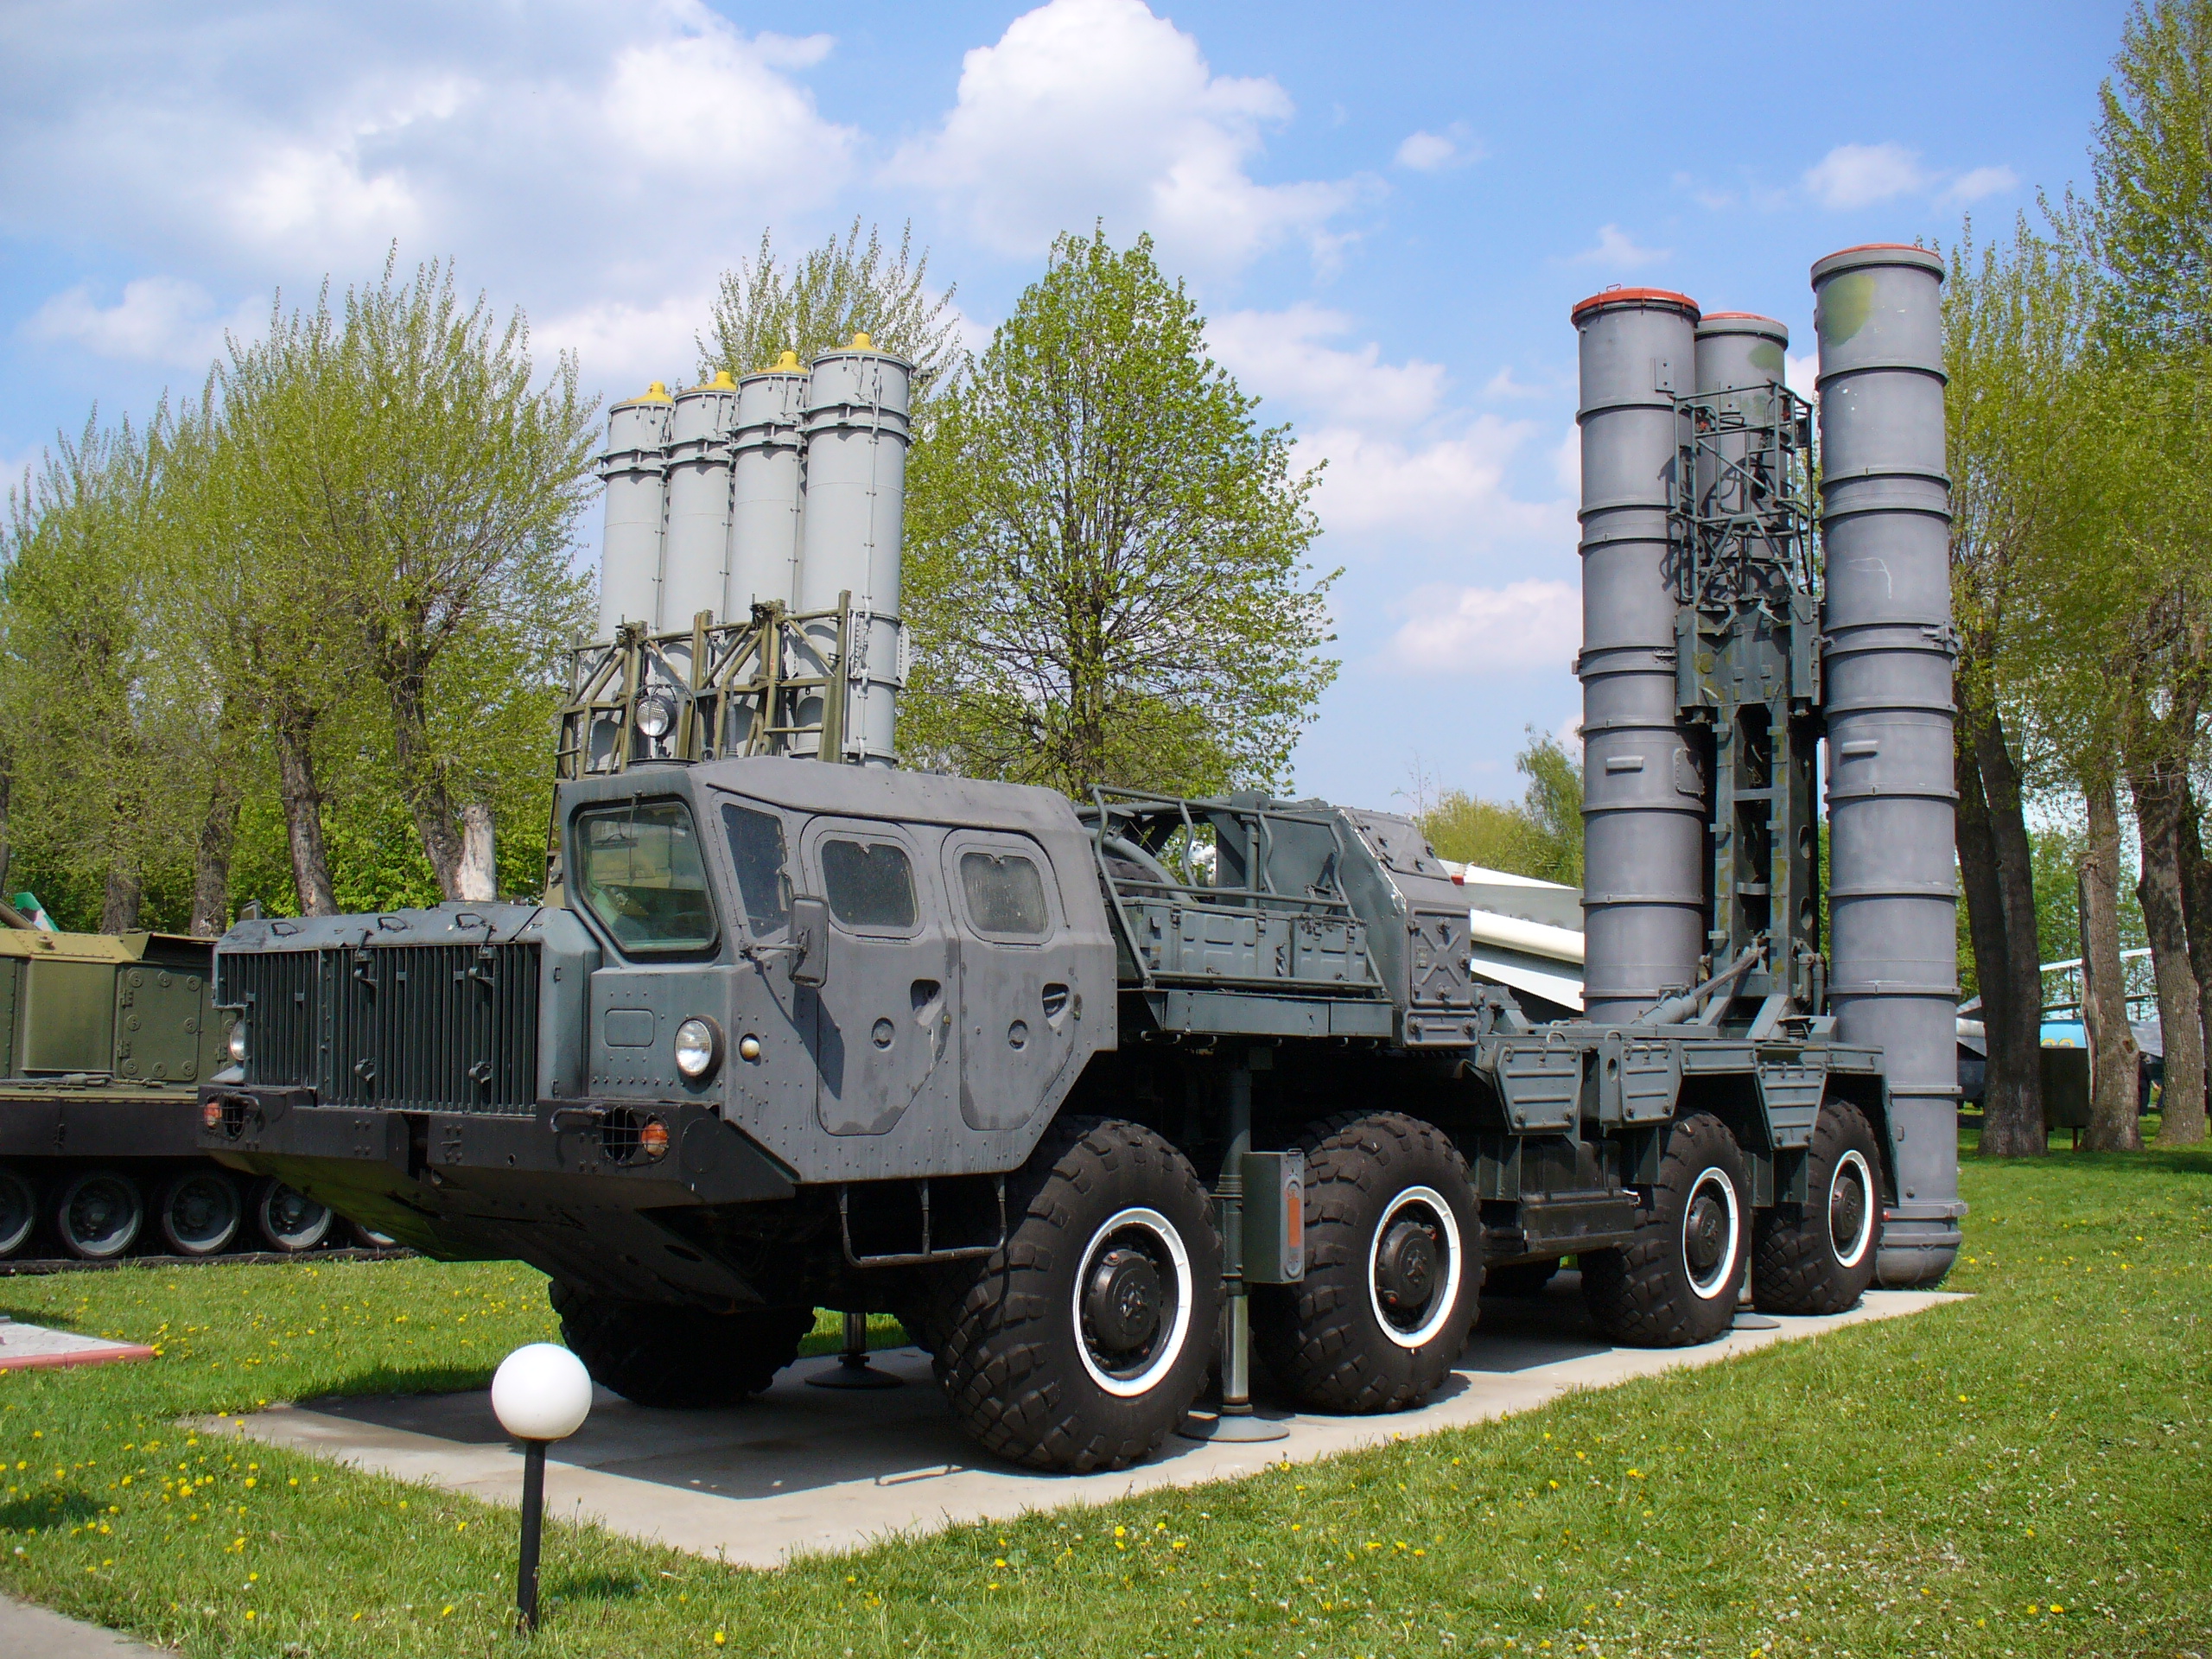 S-125 Missile System Wallpapers